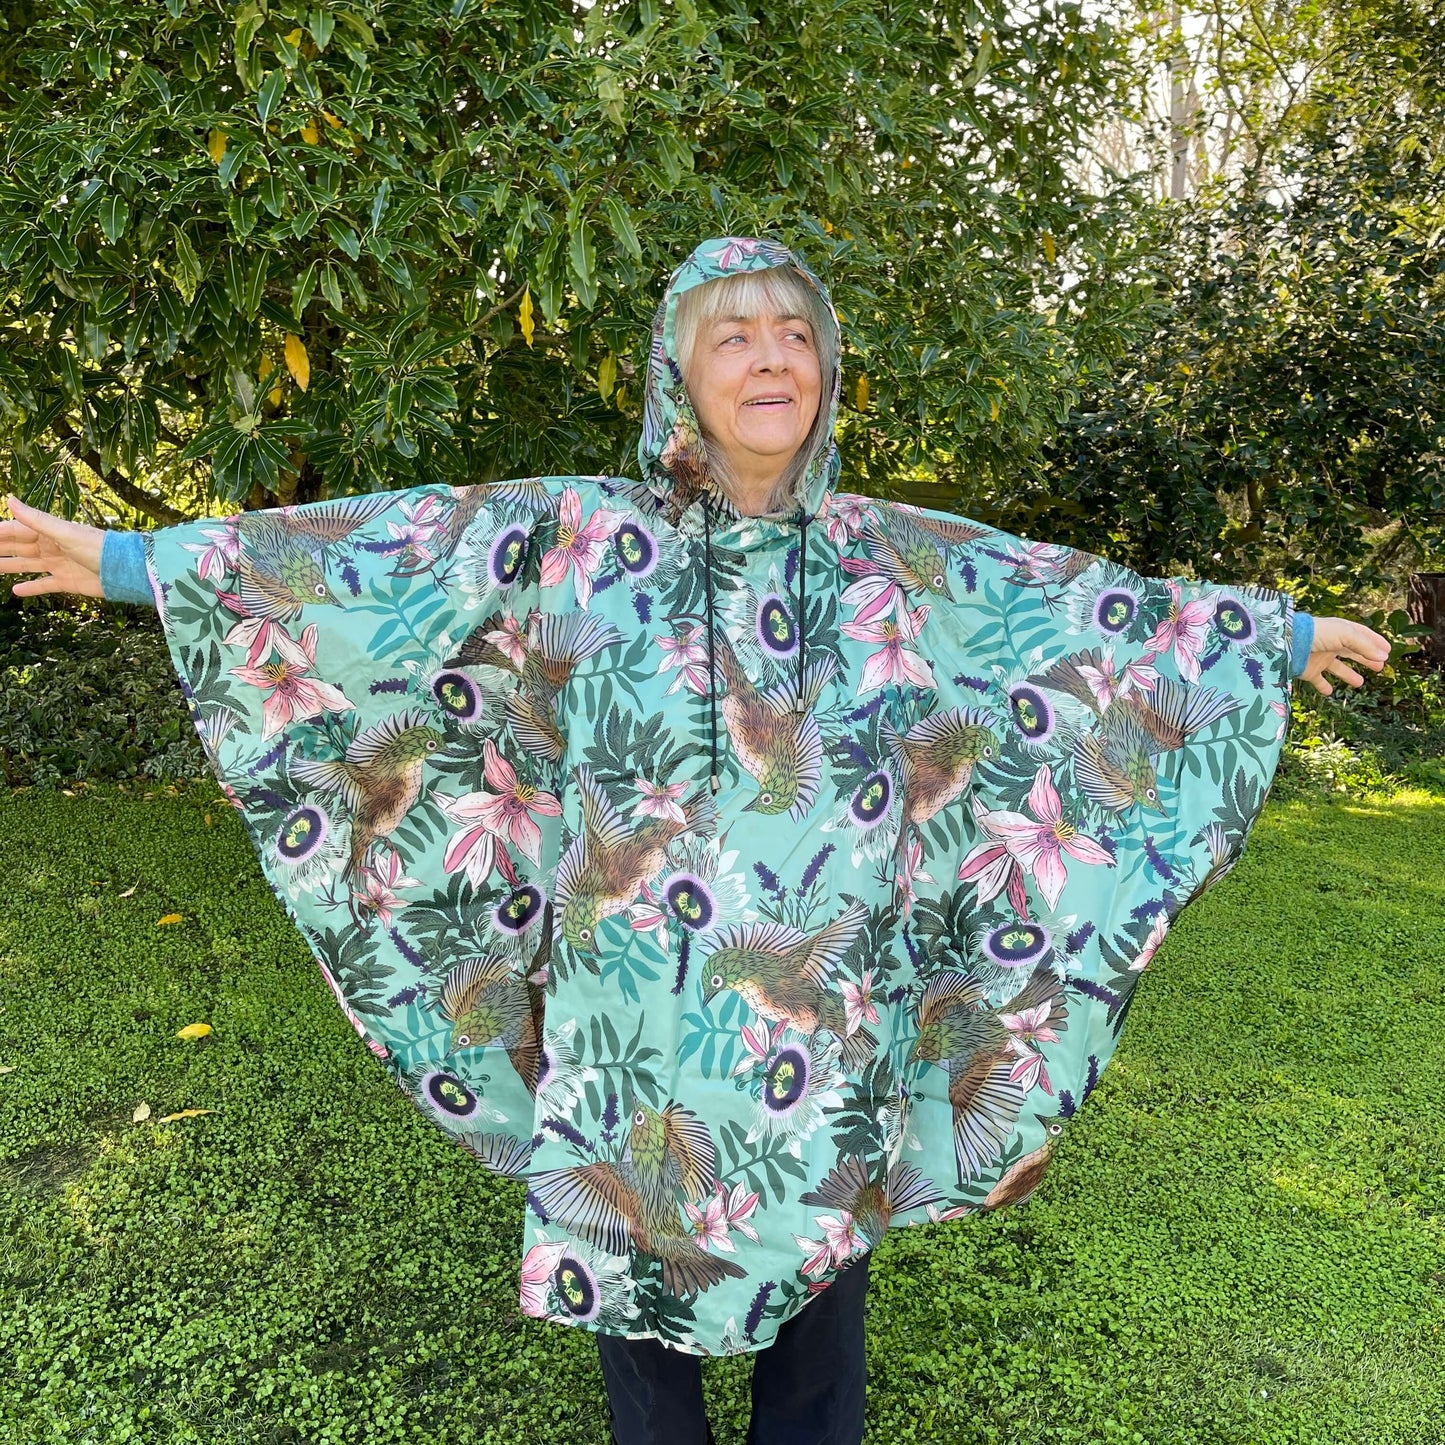 Woman wearing a rain poncho with birds and flower print on a light blue background.